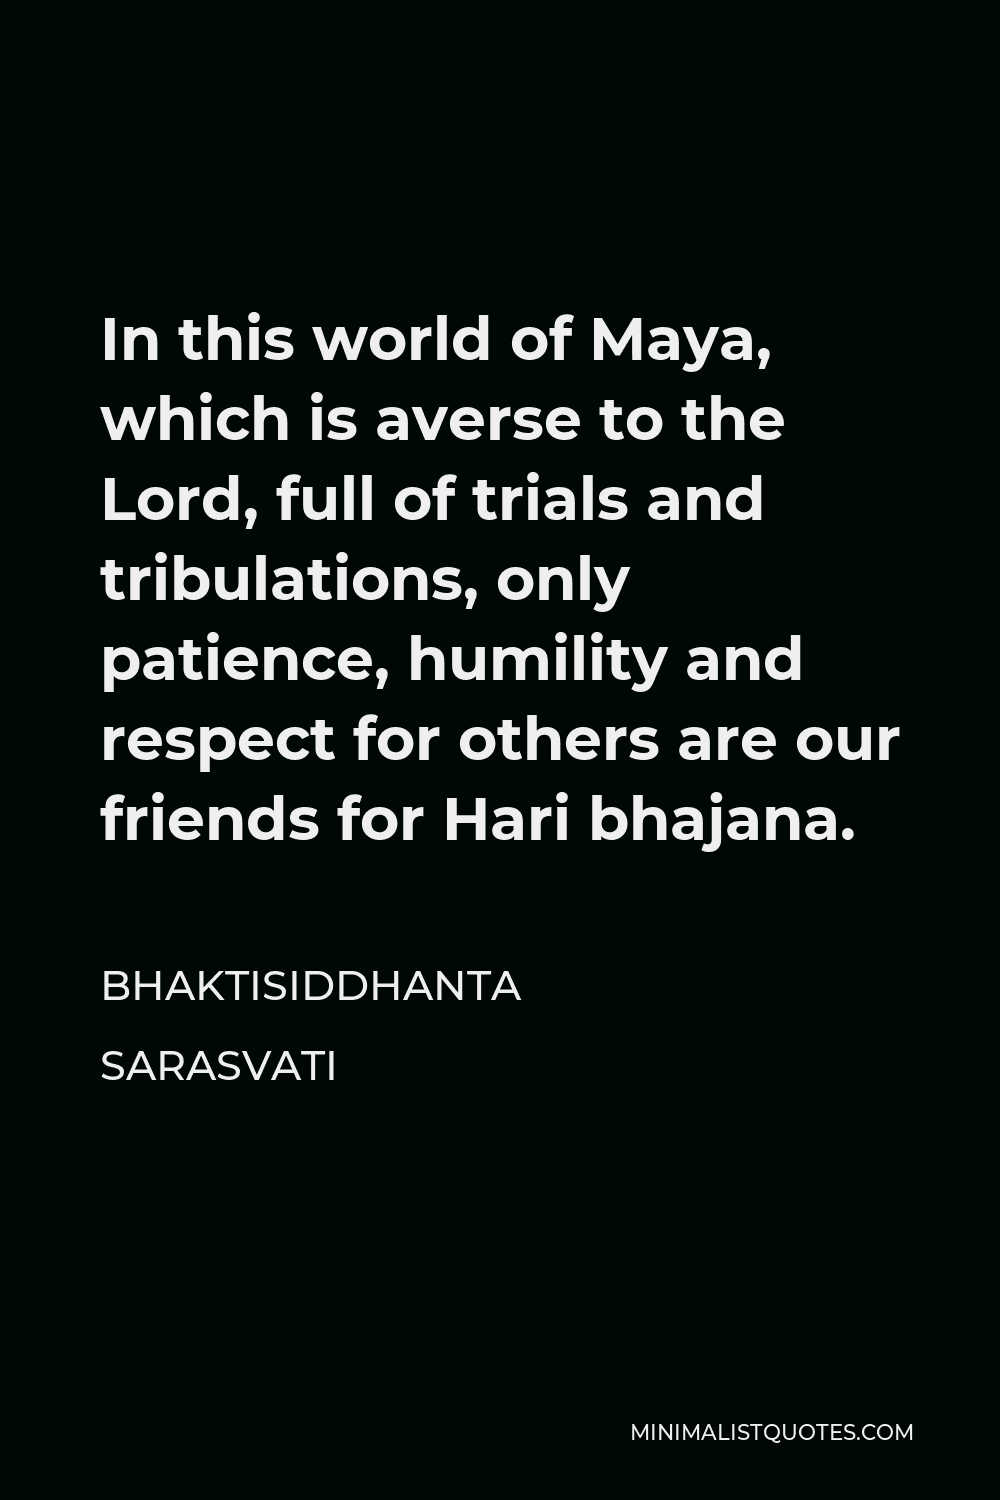 Bhaktisiddhanta Sarasvati Quote - In this world of Maya, which is averse to the Lord, full of trials and tribulations, only patience, humility and respect for others are our friends for Hari bhajana.